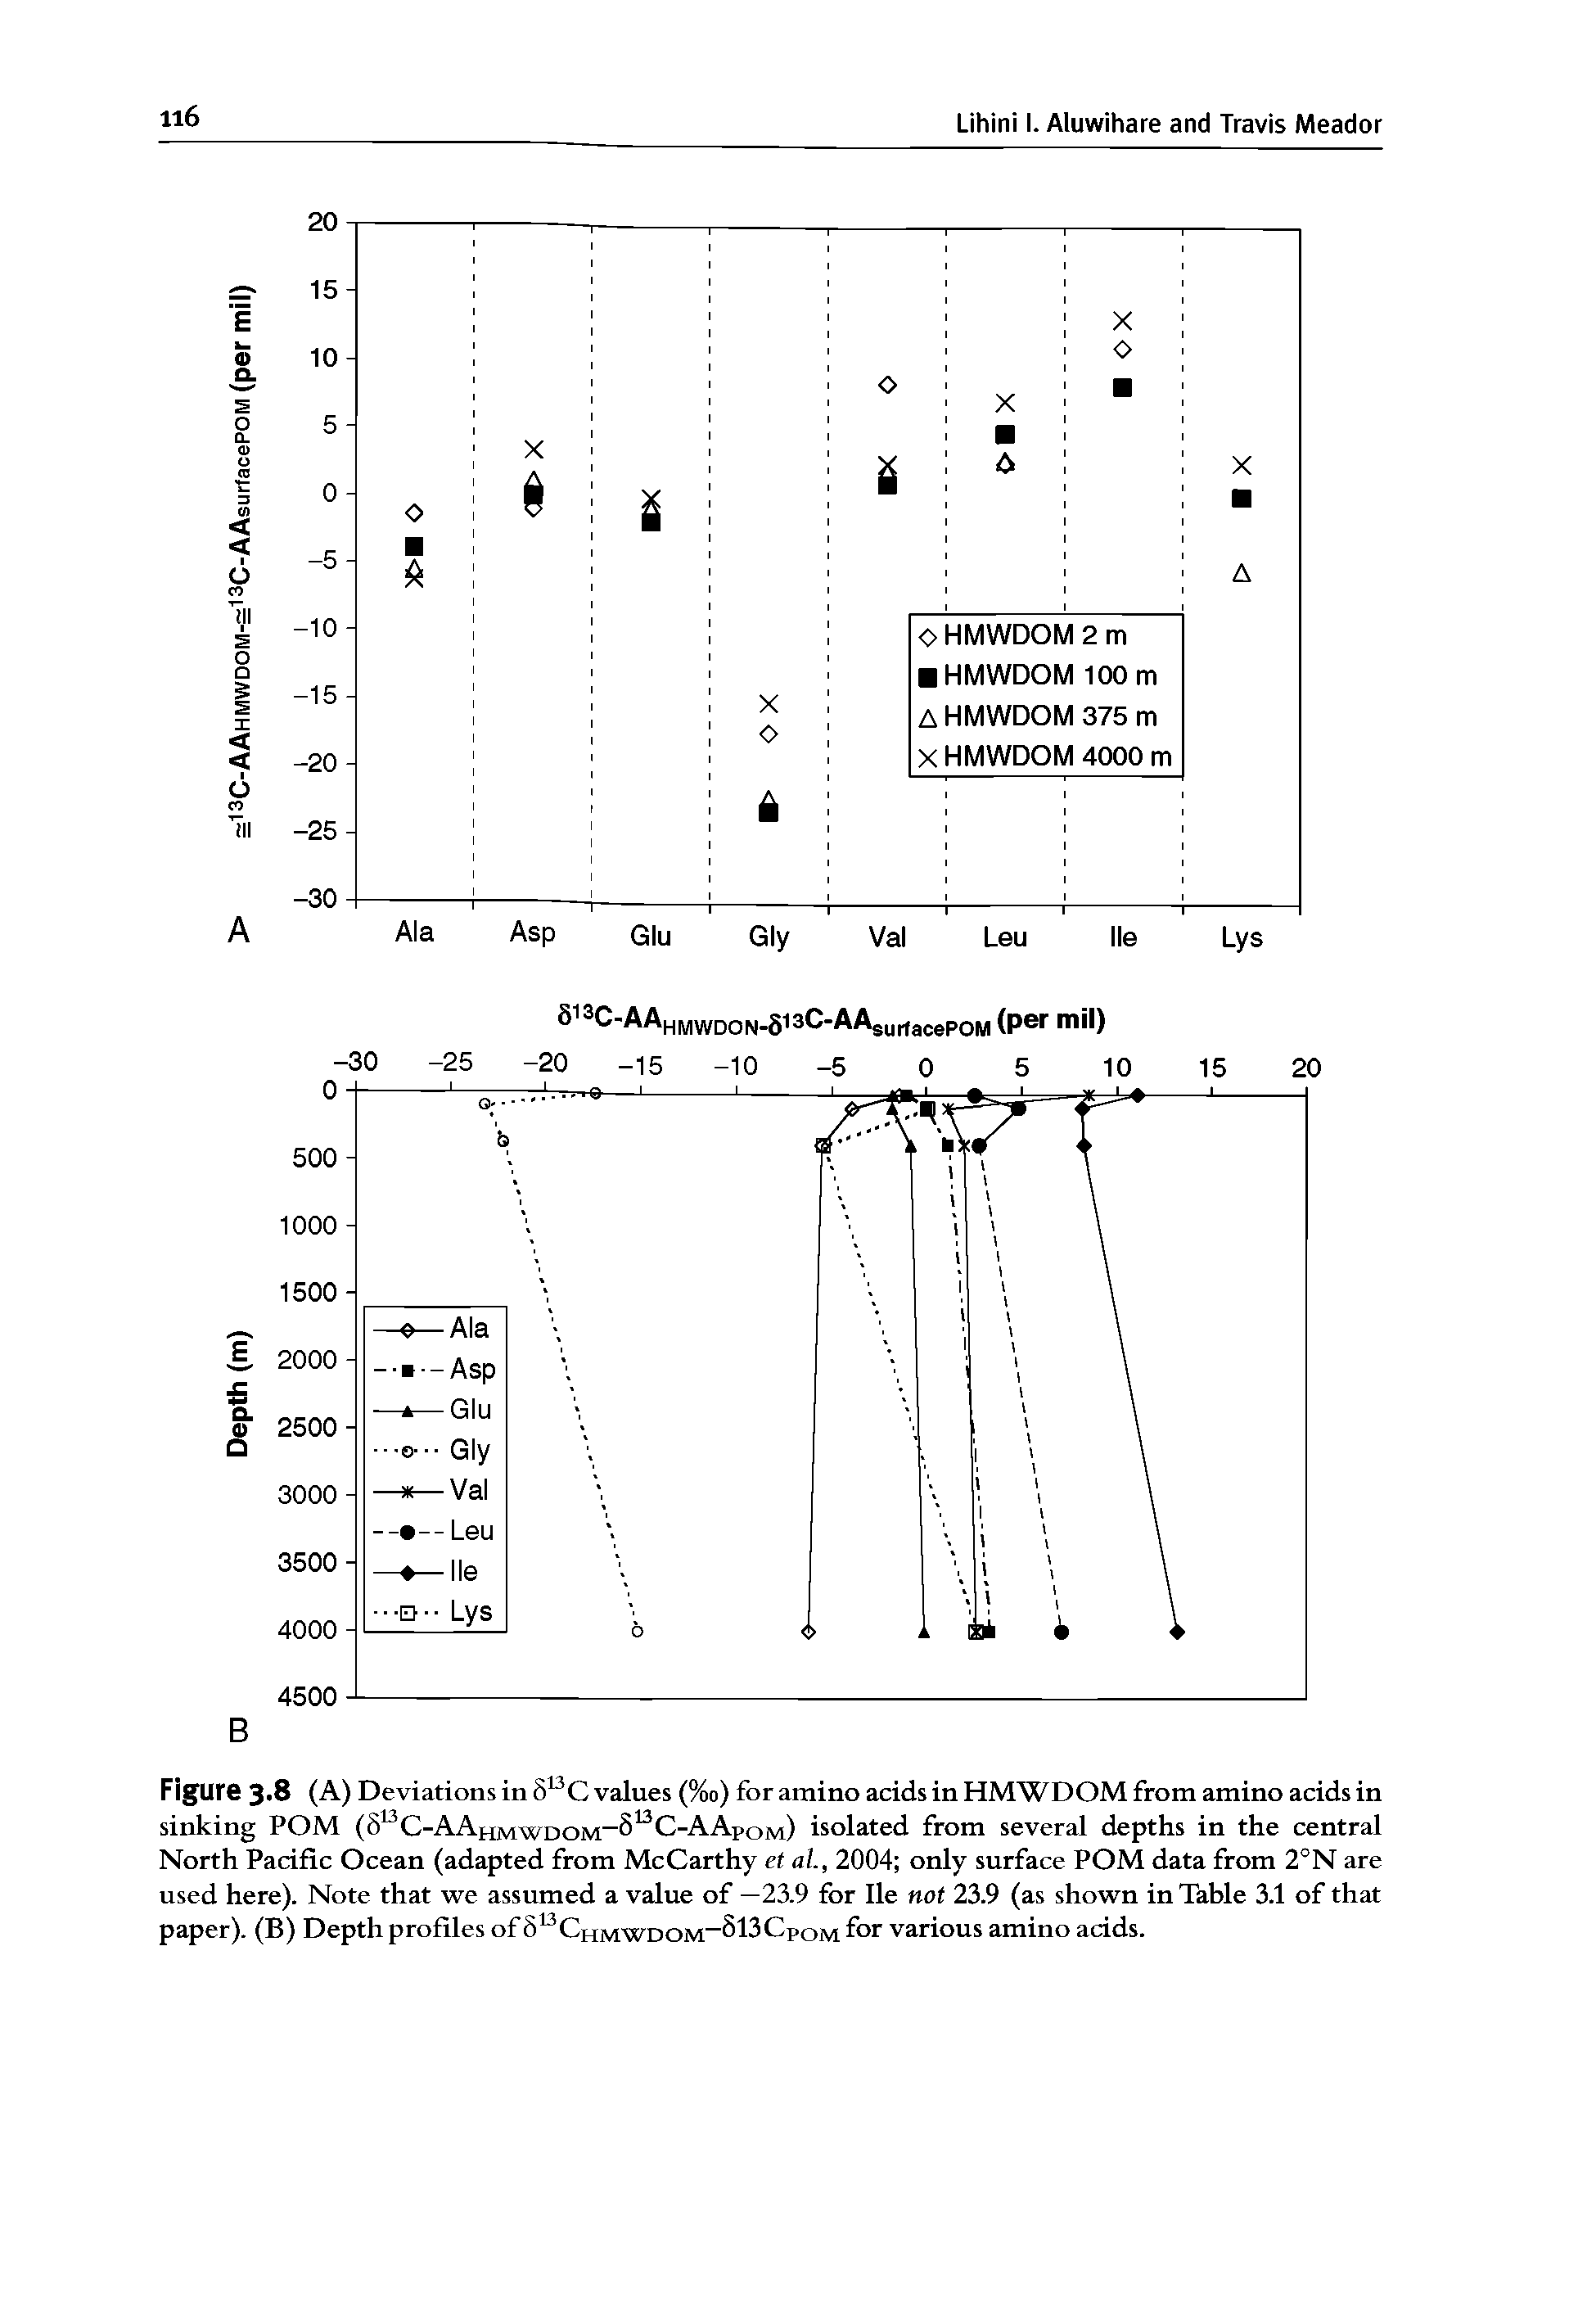 Figure 3-8 (A) Deviations in 5 C values (%o) for amino acids in HMWDOM from amino acids in sinking POM (5 C-AAhmwdom 5 C-AApom) isolated from several depths in the central North Pacific Ocean (adapted from McCarthy et ah, 2004 only surface POM data from 2°N are used here). Note that we assumed a value of —23.9 for lie not 23.9 (as shown in Table 3.1 of that paper). (B) Depthprofilesof5 CHMWDOM 5l3CpoM for various amino acids.